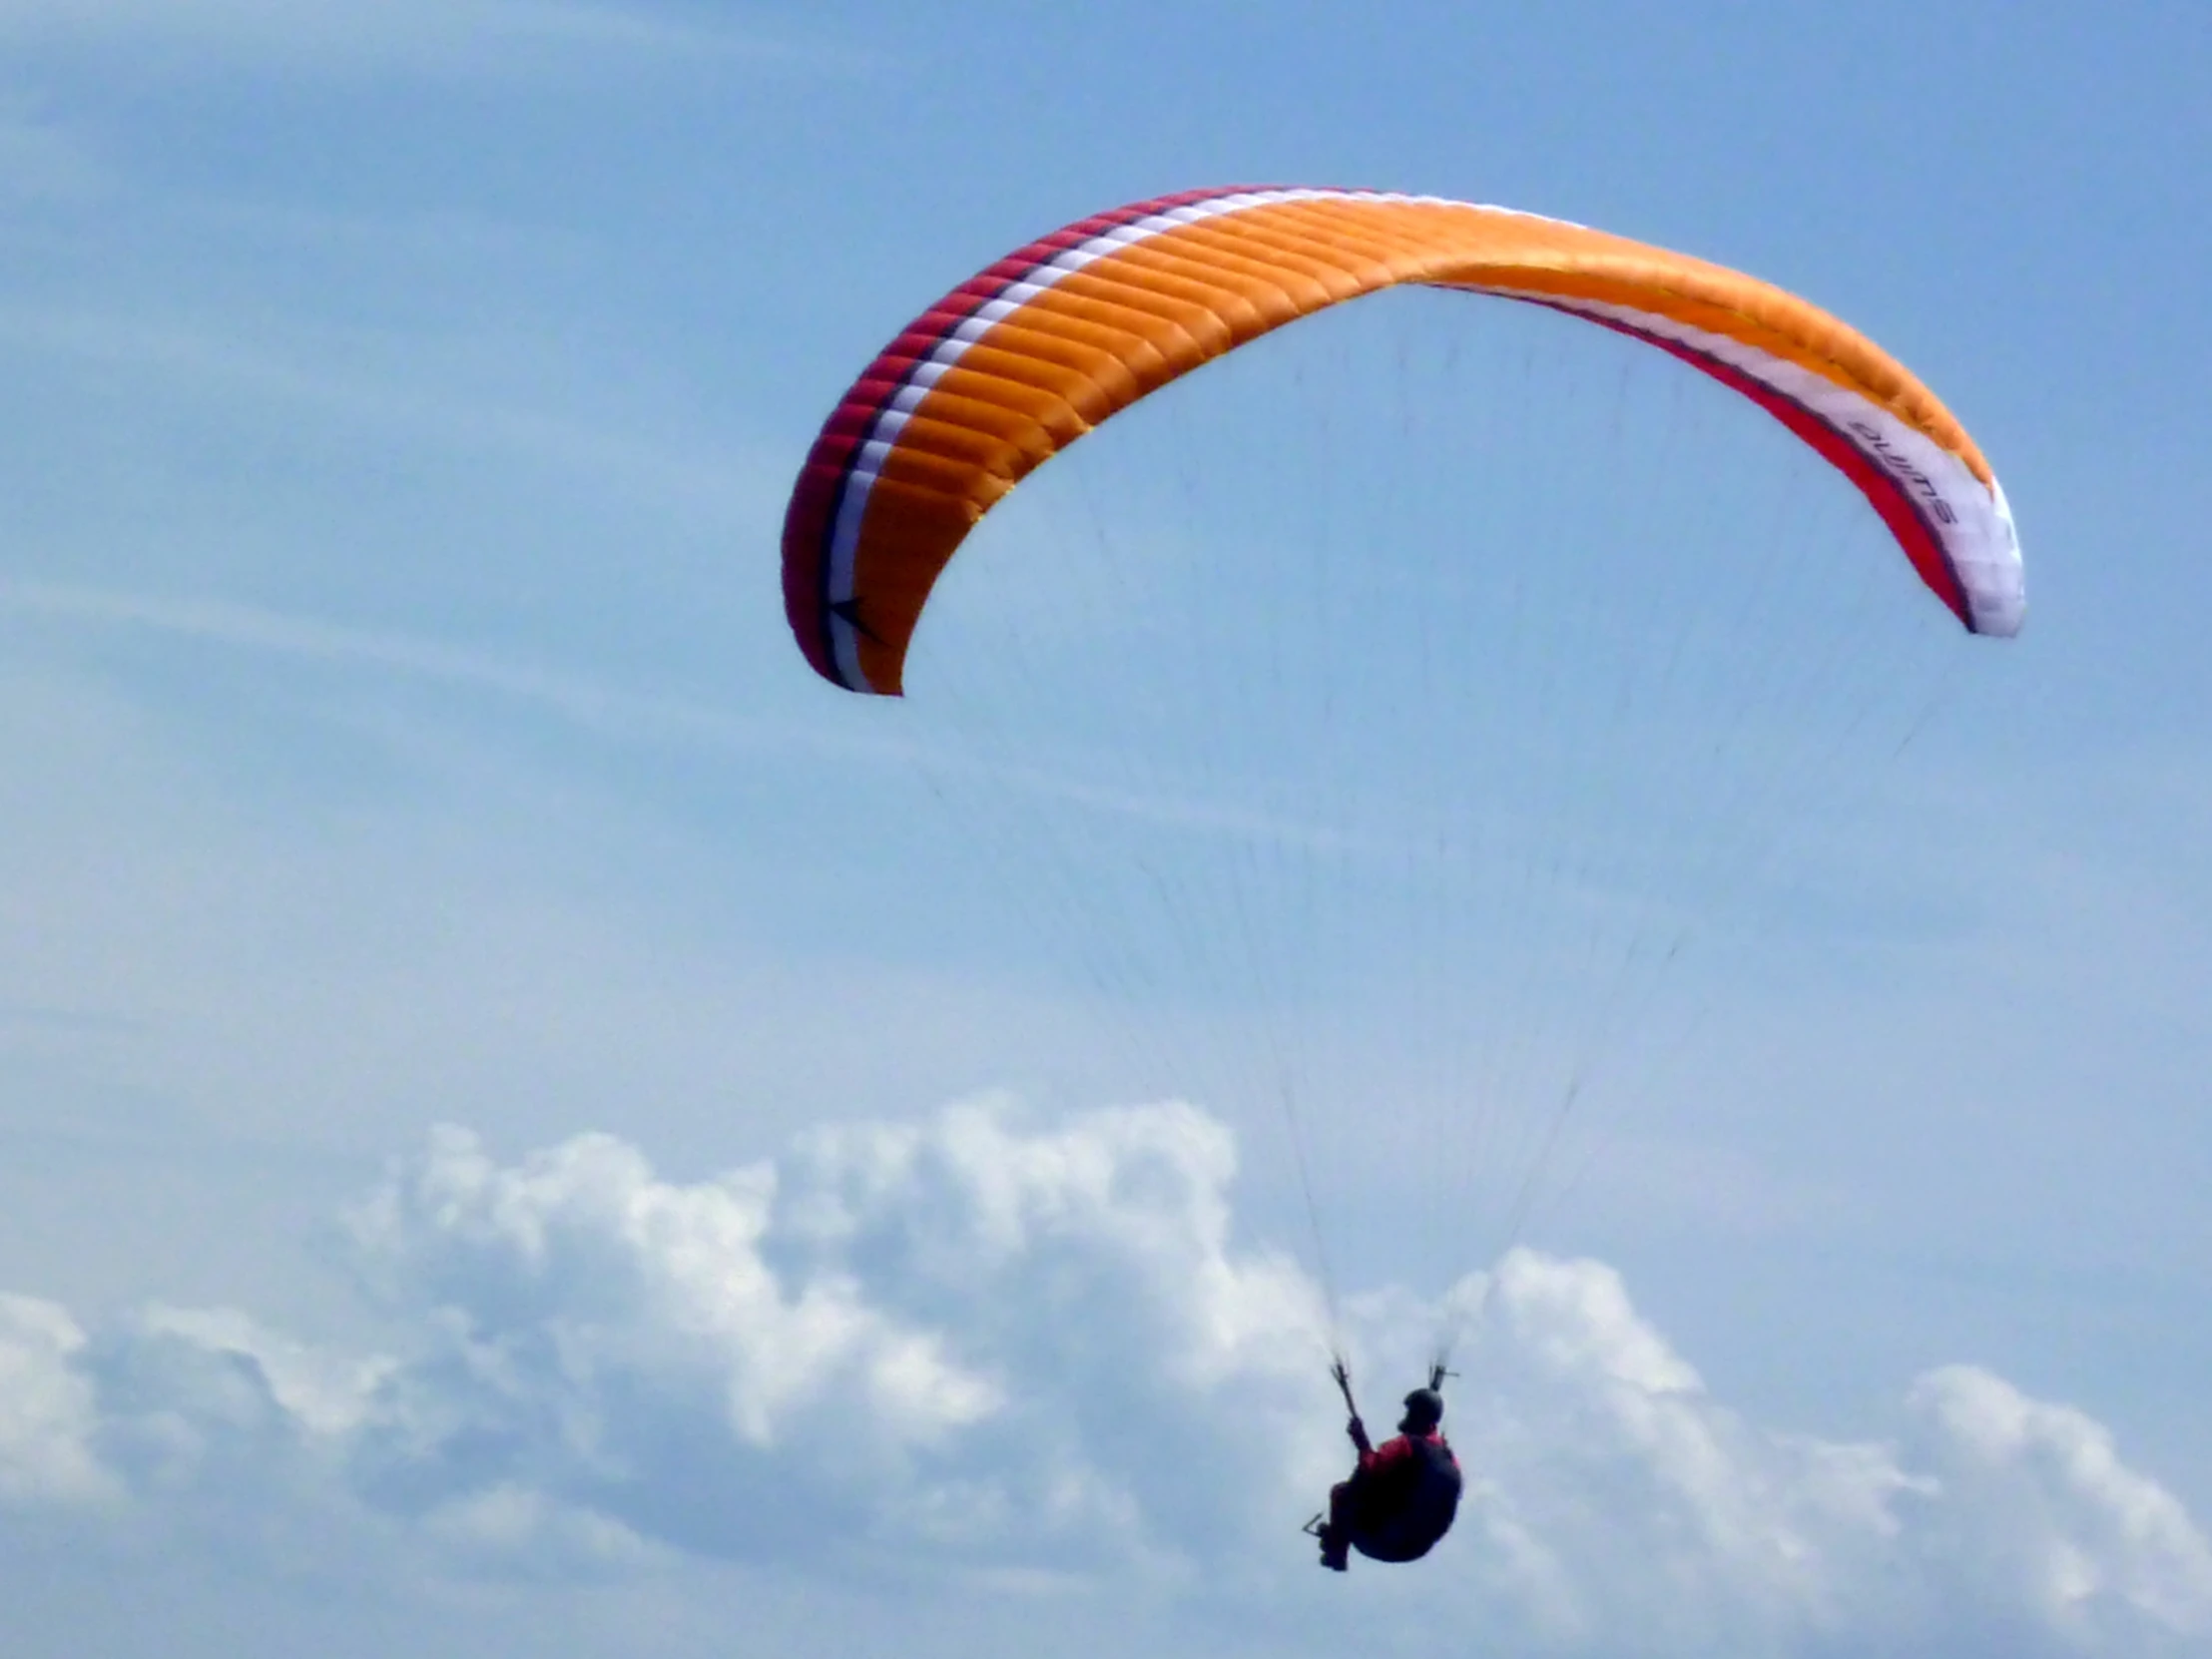 man riding a parachute in the sky on his feet